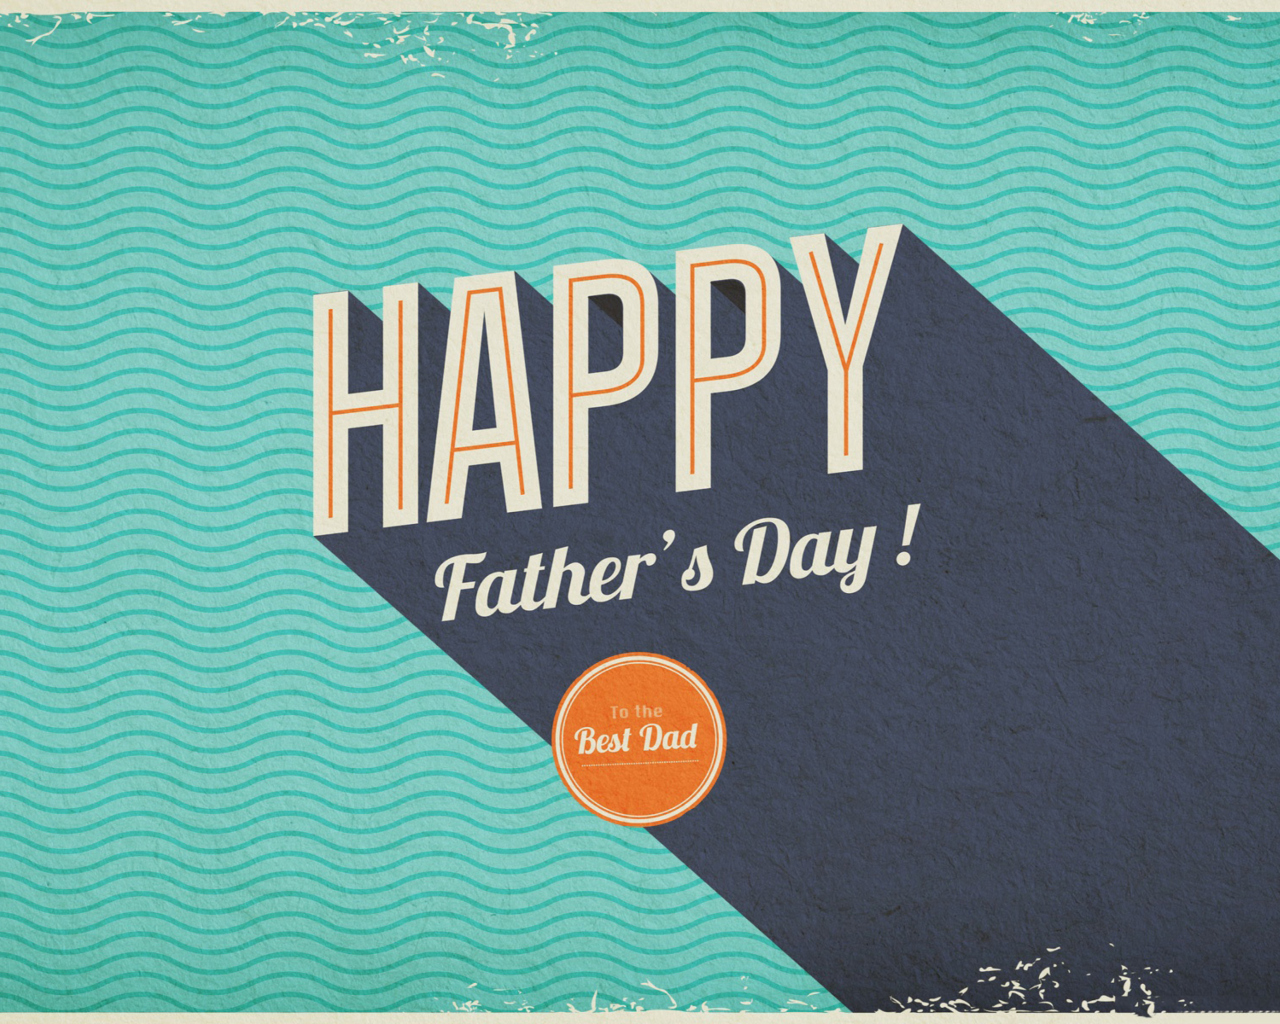 Happy Fathers Day wallpaper 1280x1024